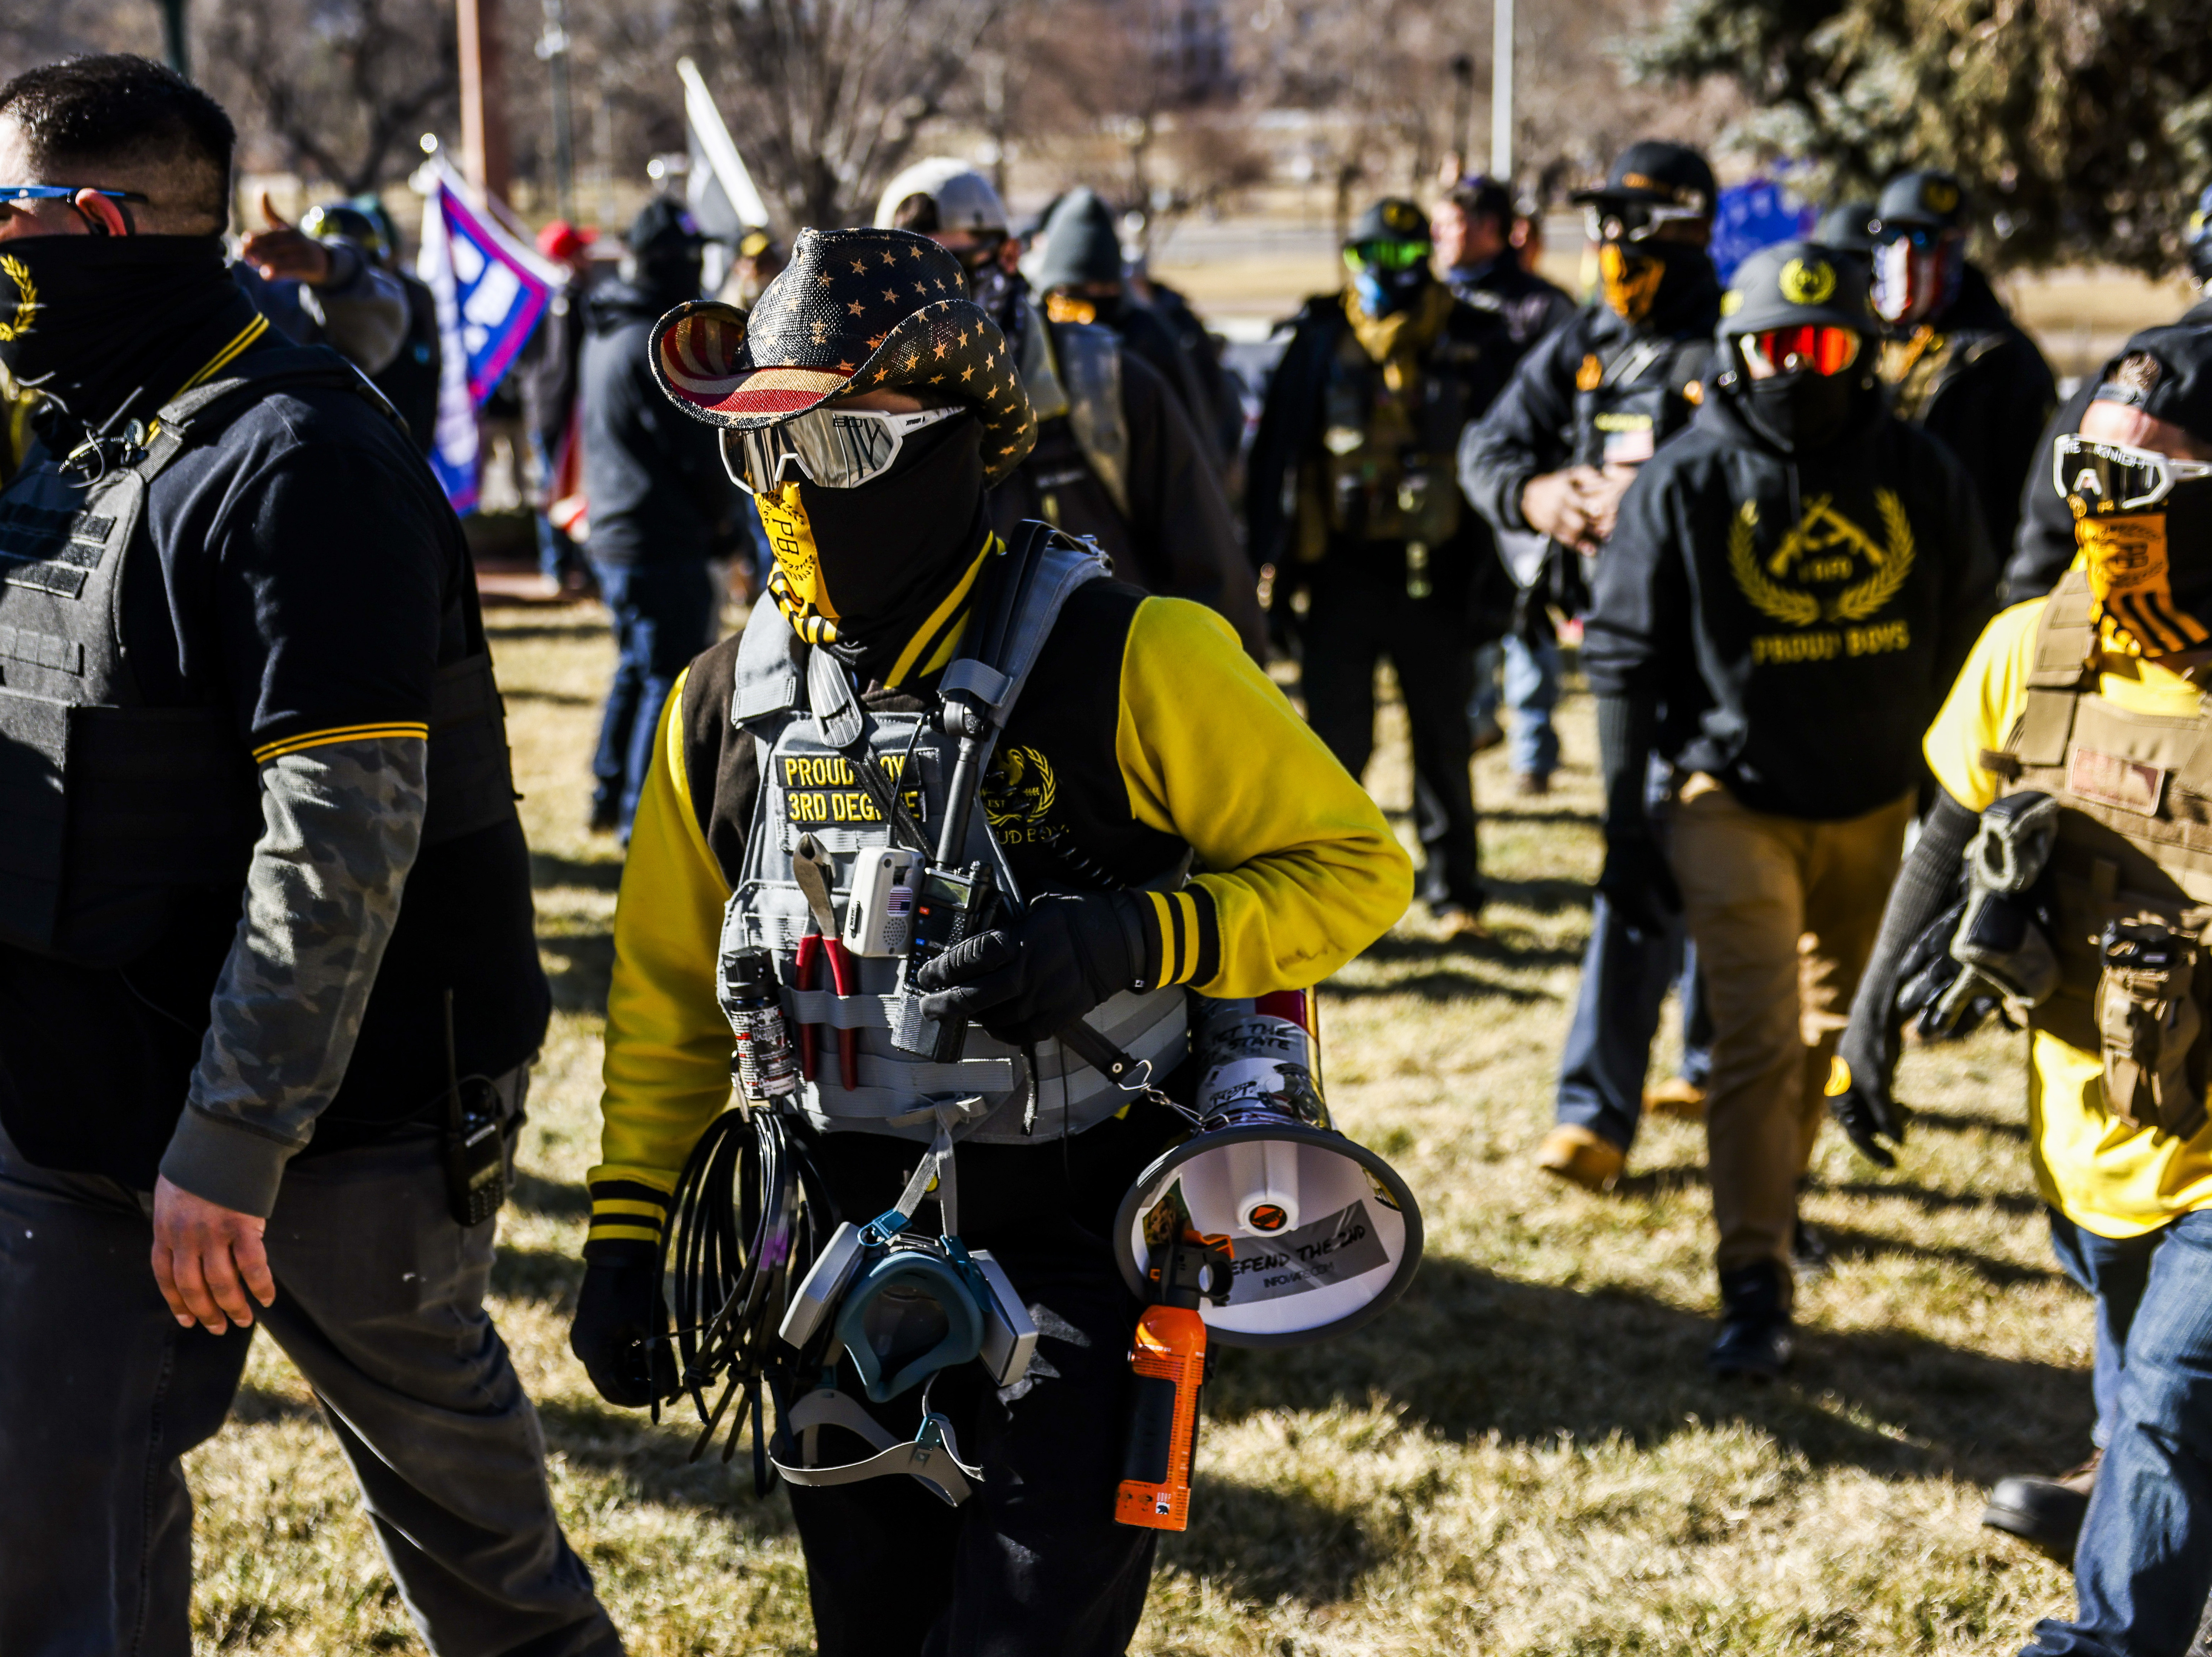 Public Safety Canada notes that last month, members of the Proud Boys "played a pivotal role in the insurrection at the U.S. Capitol." Here, Proud Boys members join Donald Trump supporters at a protest outside the Colorado State Capitol last month in Denver. CREDIT: Michael Ciaglo/Getty Images